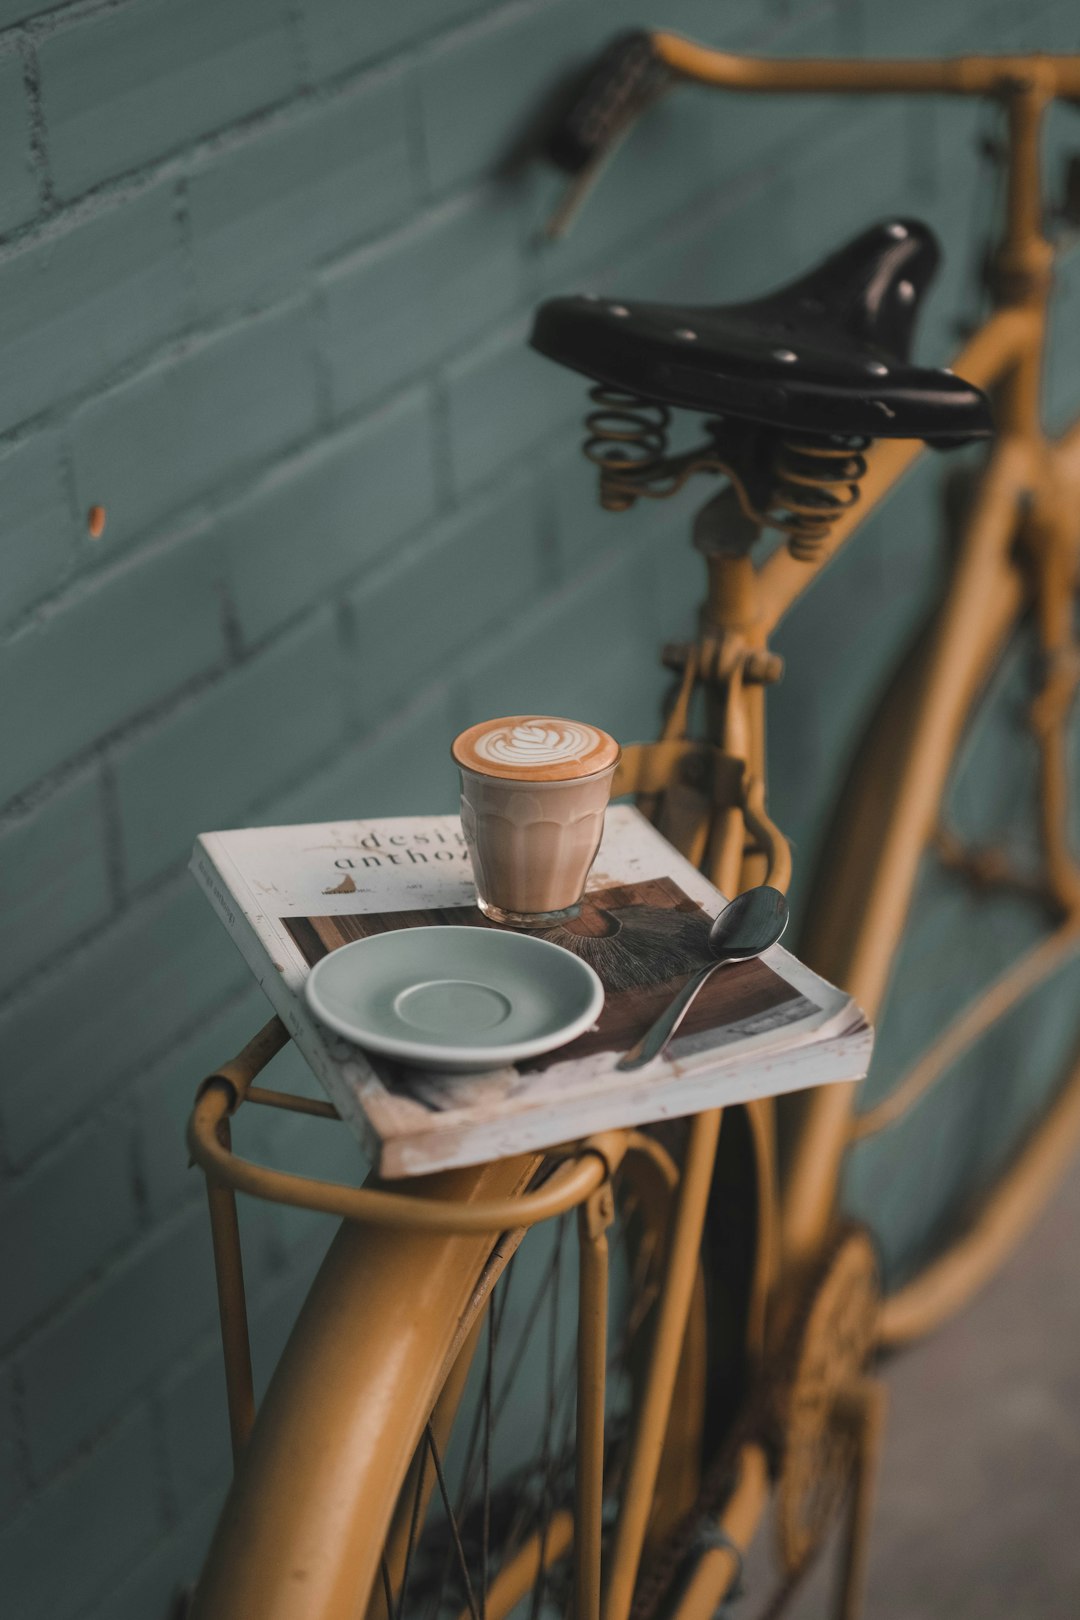 filled cup near saucer on bike